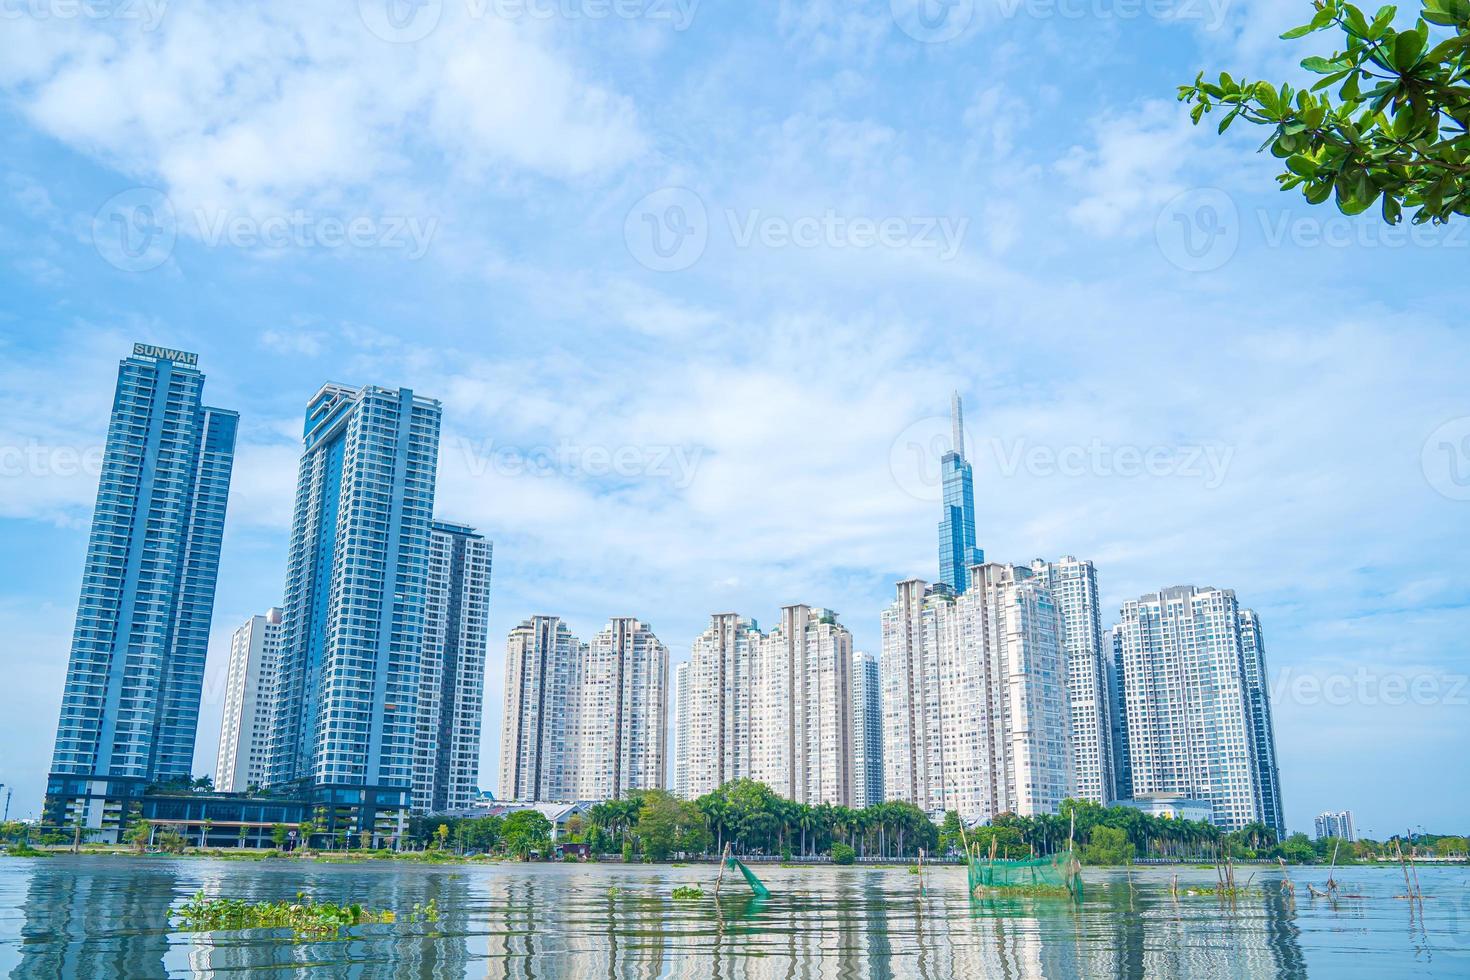 Ho Chi Minh city, VIETNAM - 12 FEB 2022 Beautiful blue sky view at Landmark 81 is a super tall skyscraper in center Ho Chi Minh City, Vietnam and Saigon bridge with development buildings photo